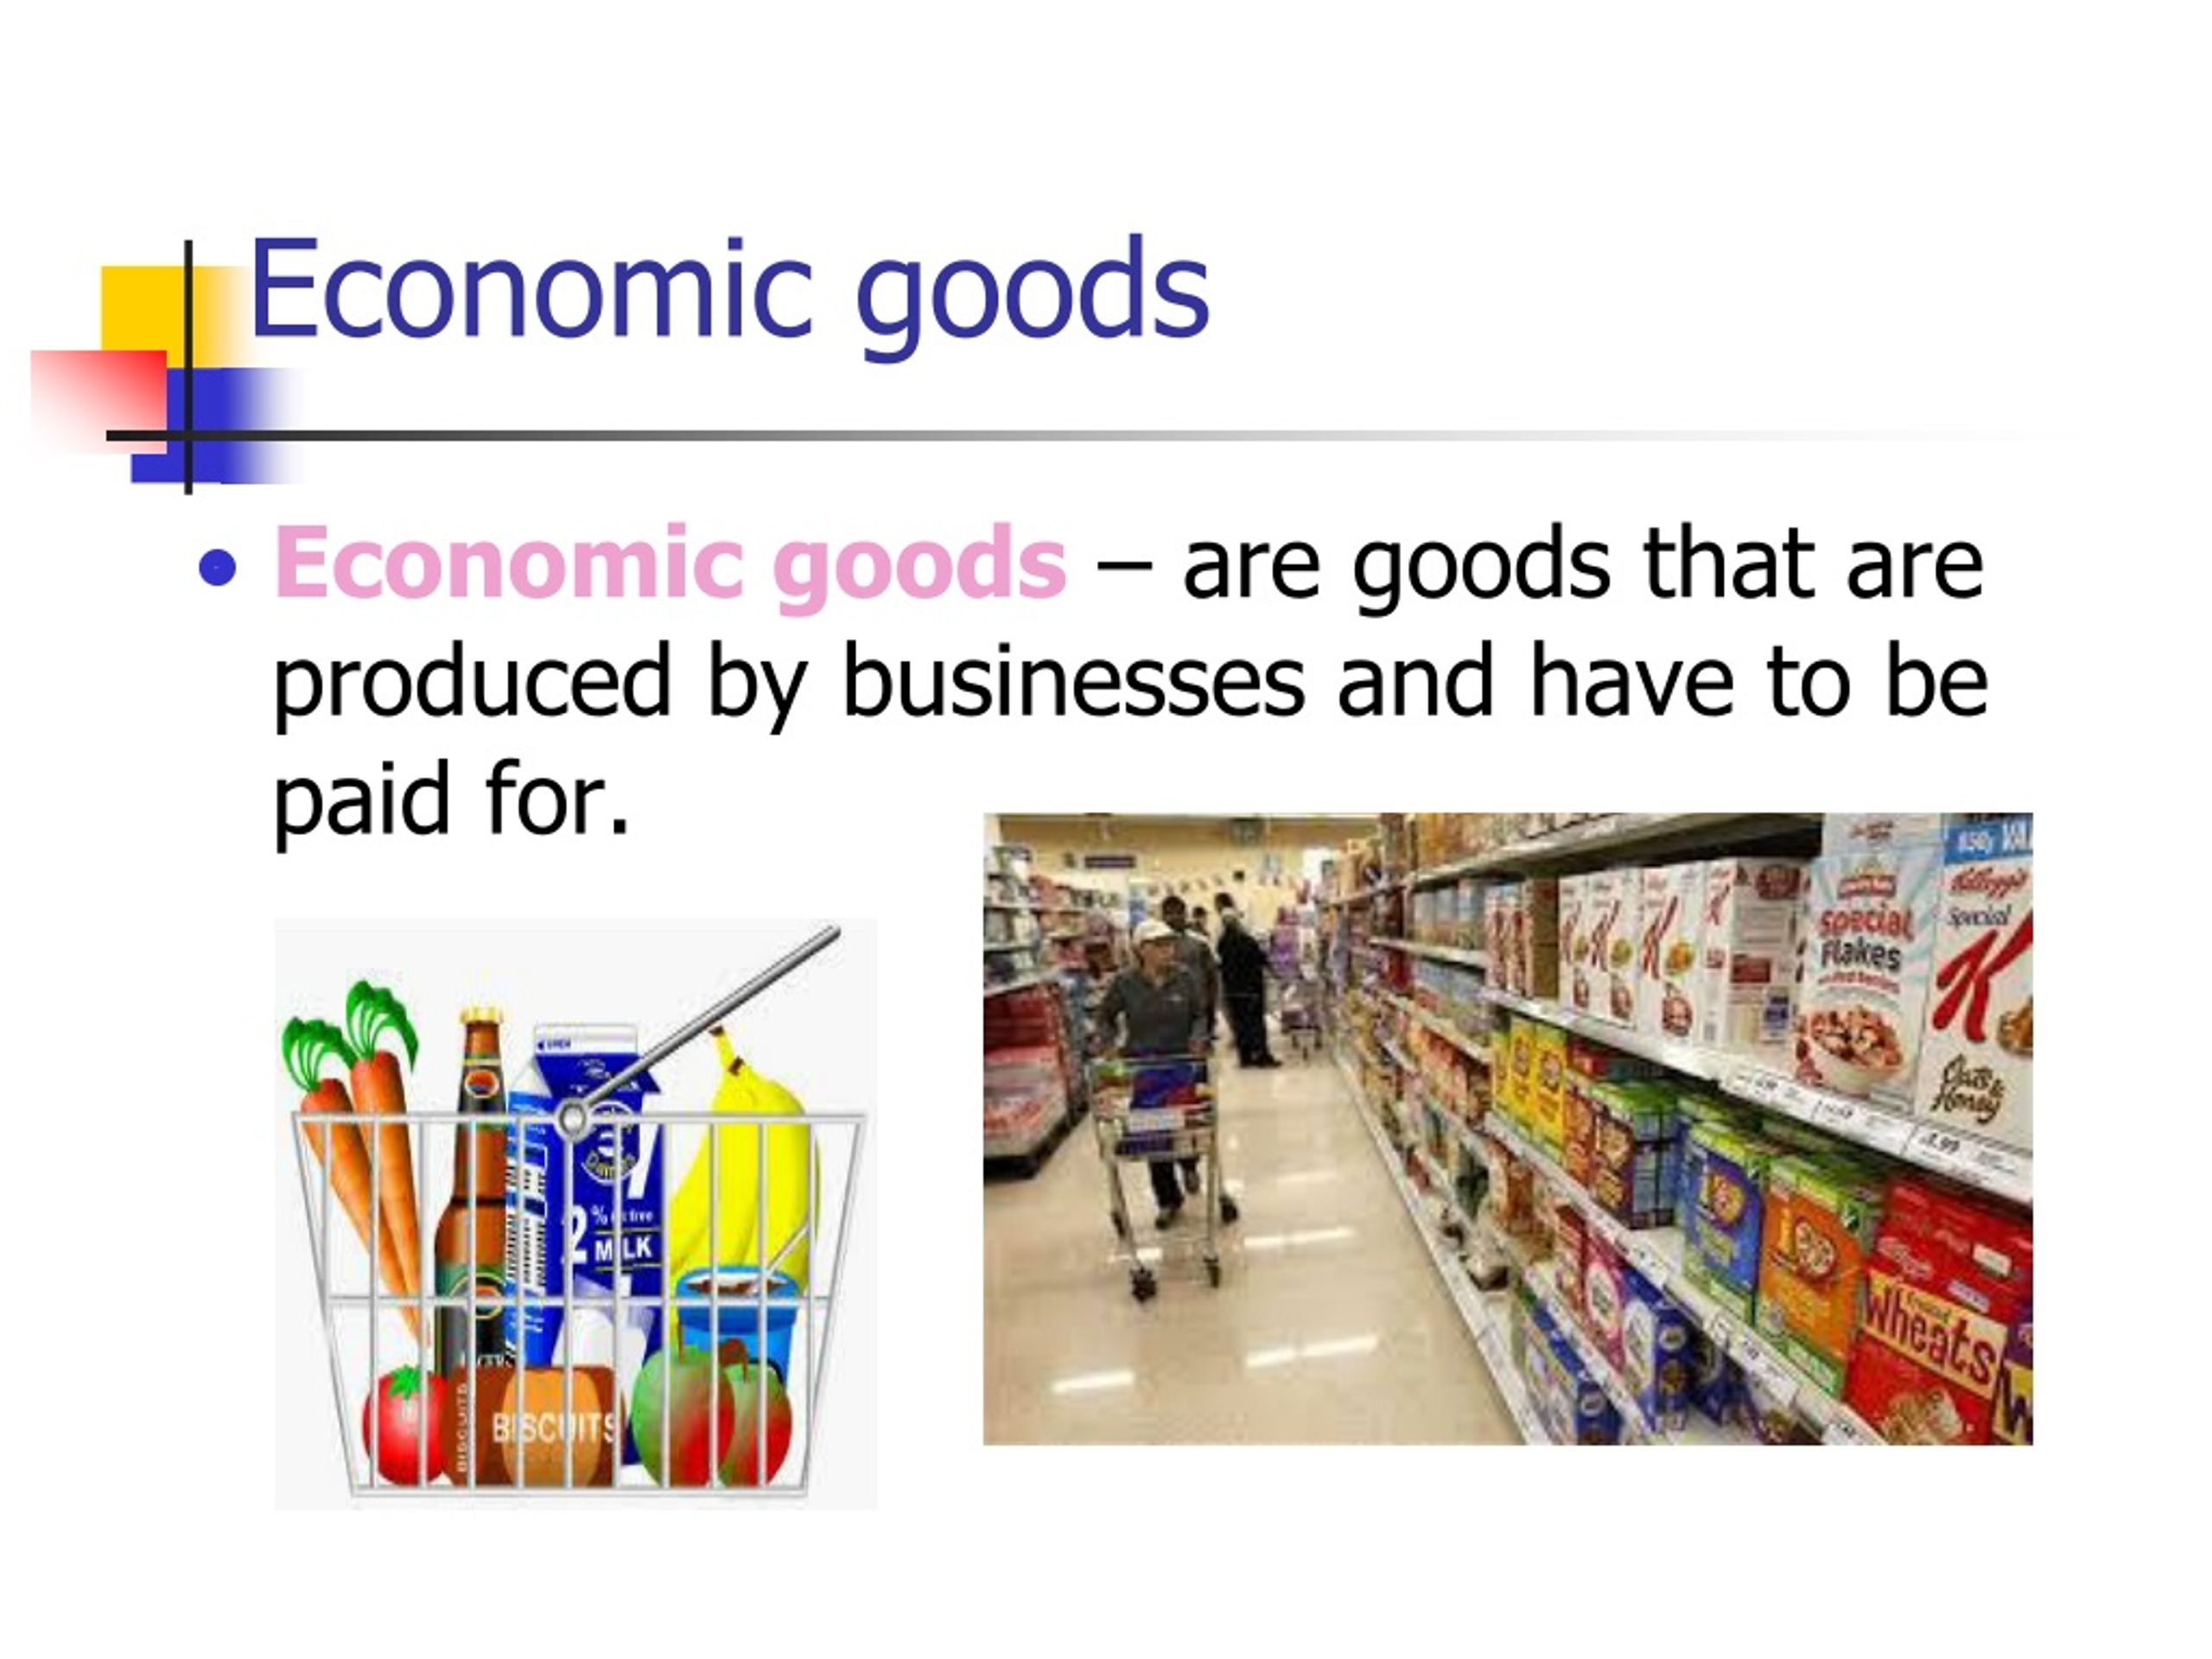 presentation about goods and services